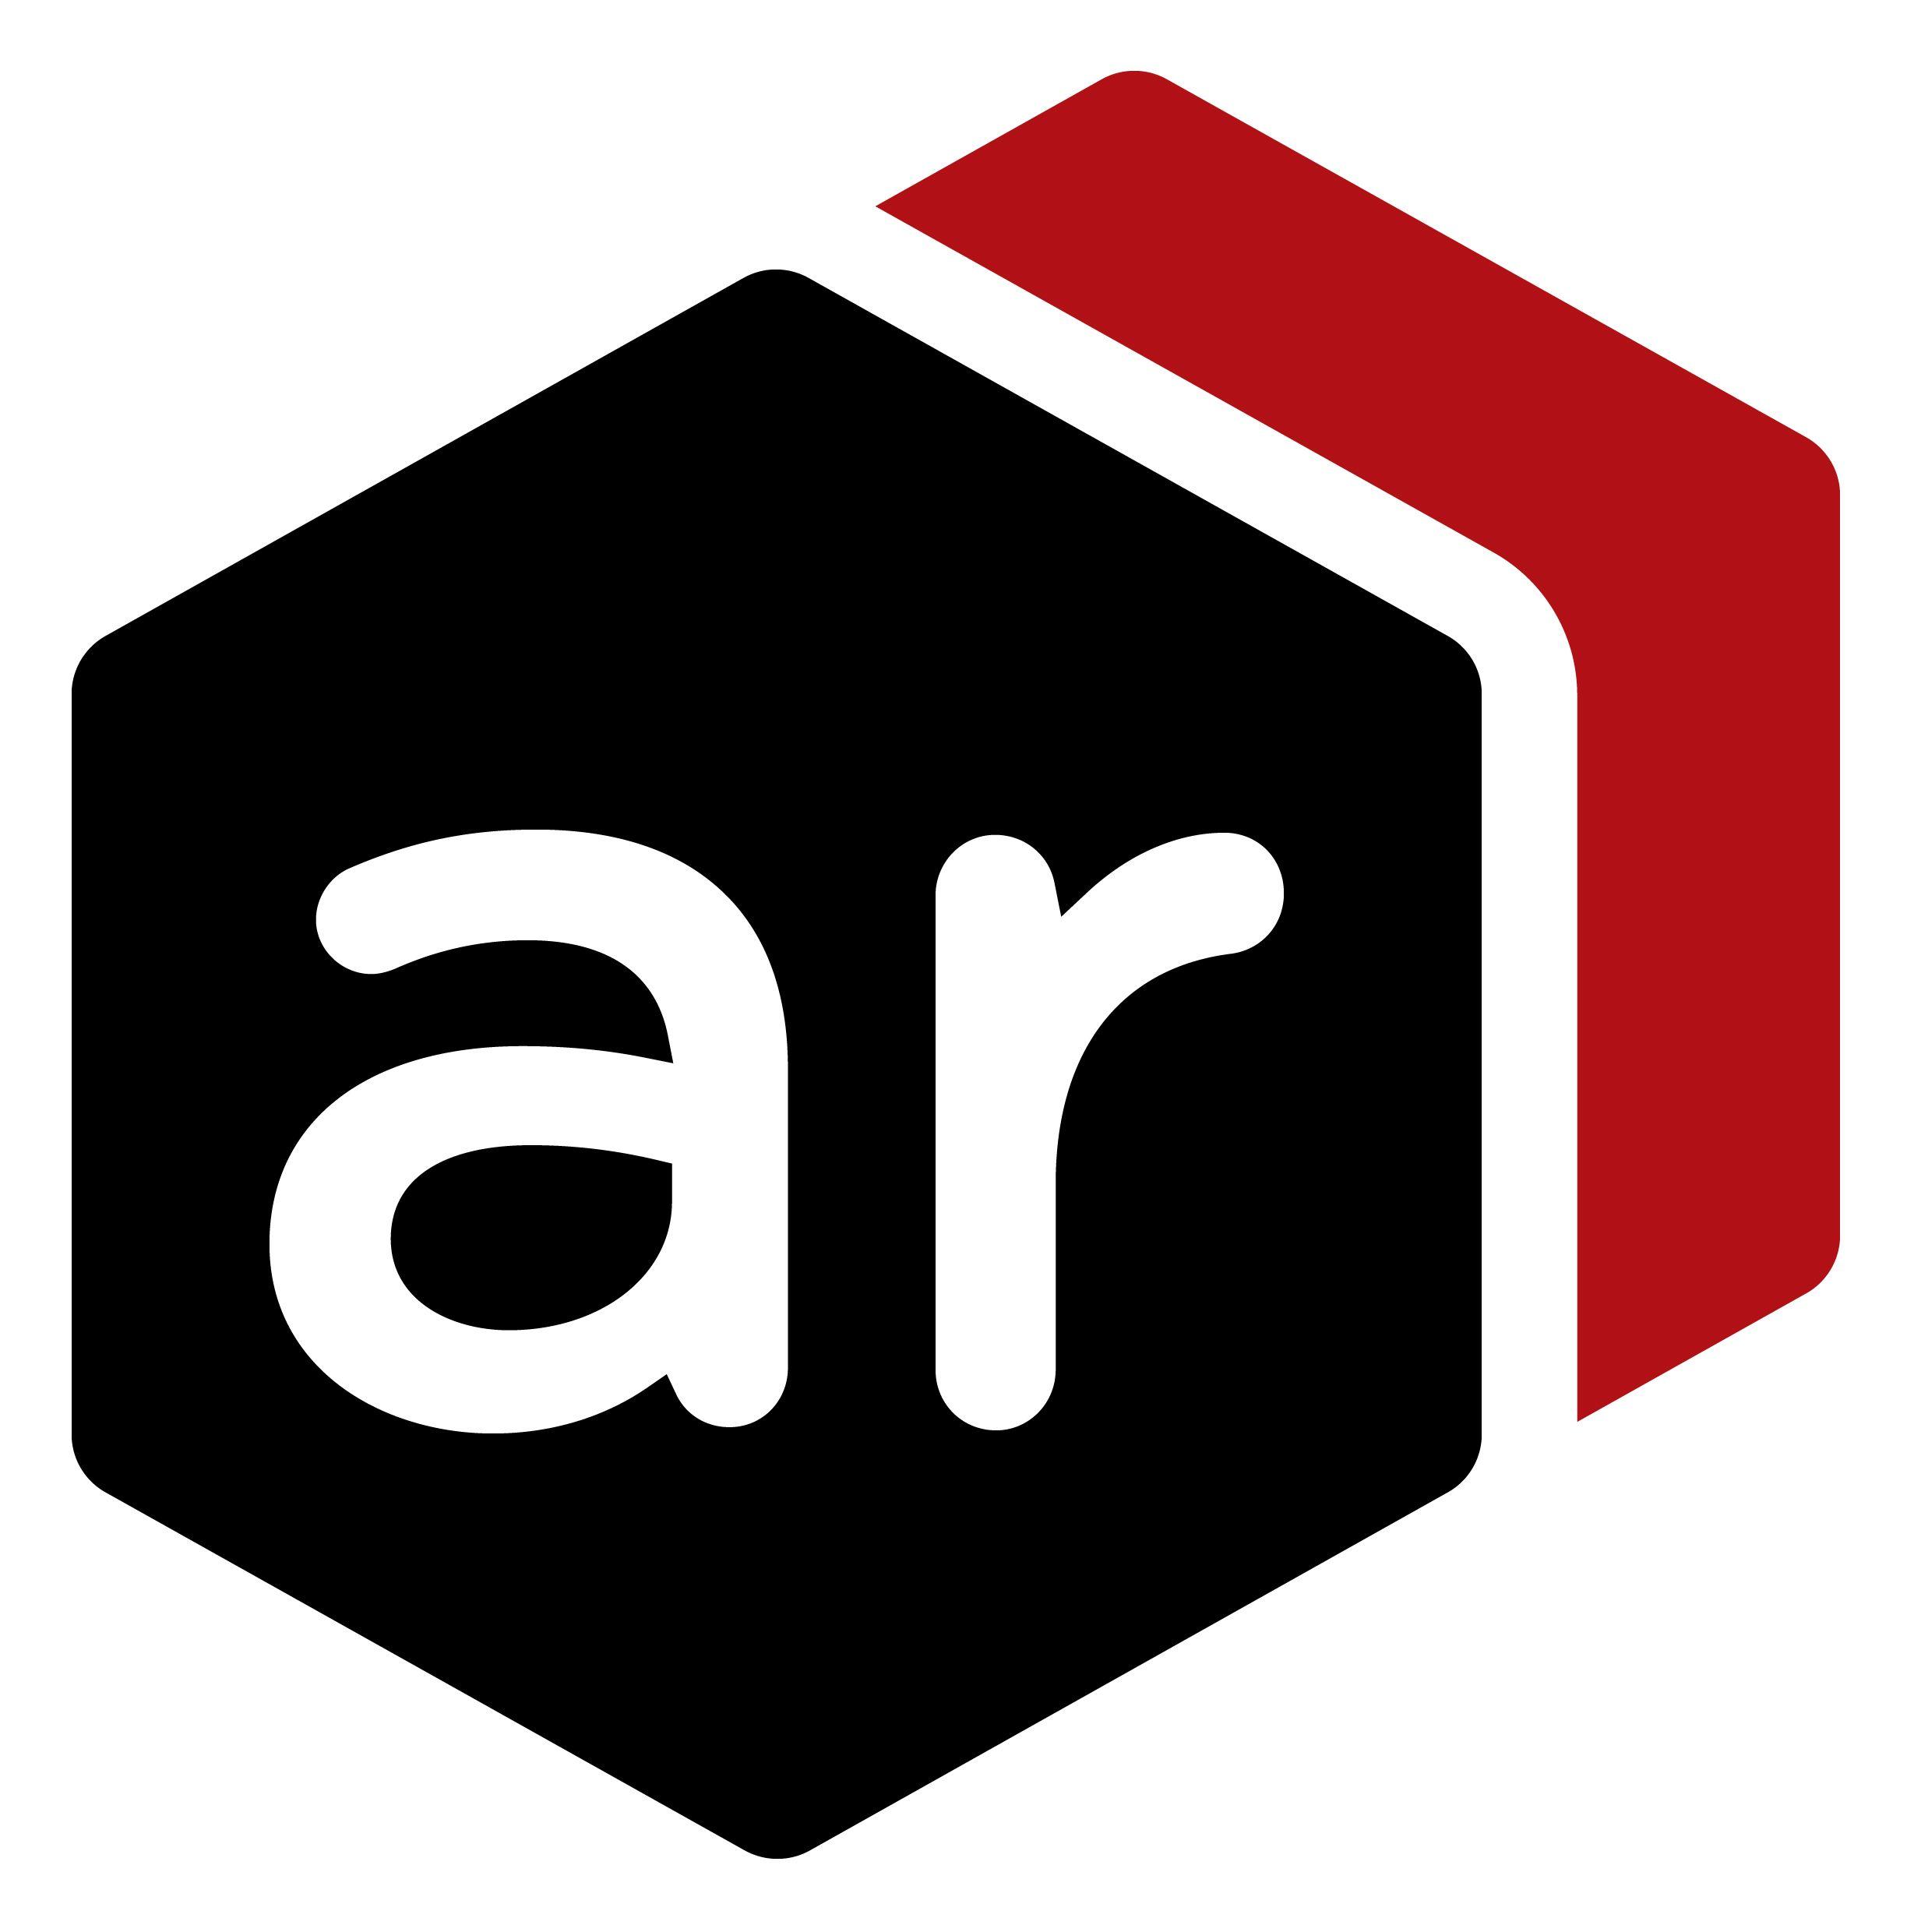 Ar Logo - WATCH: Scan pictures in our paper to experience Augmented Reality ...